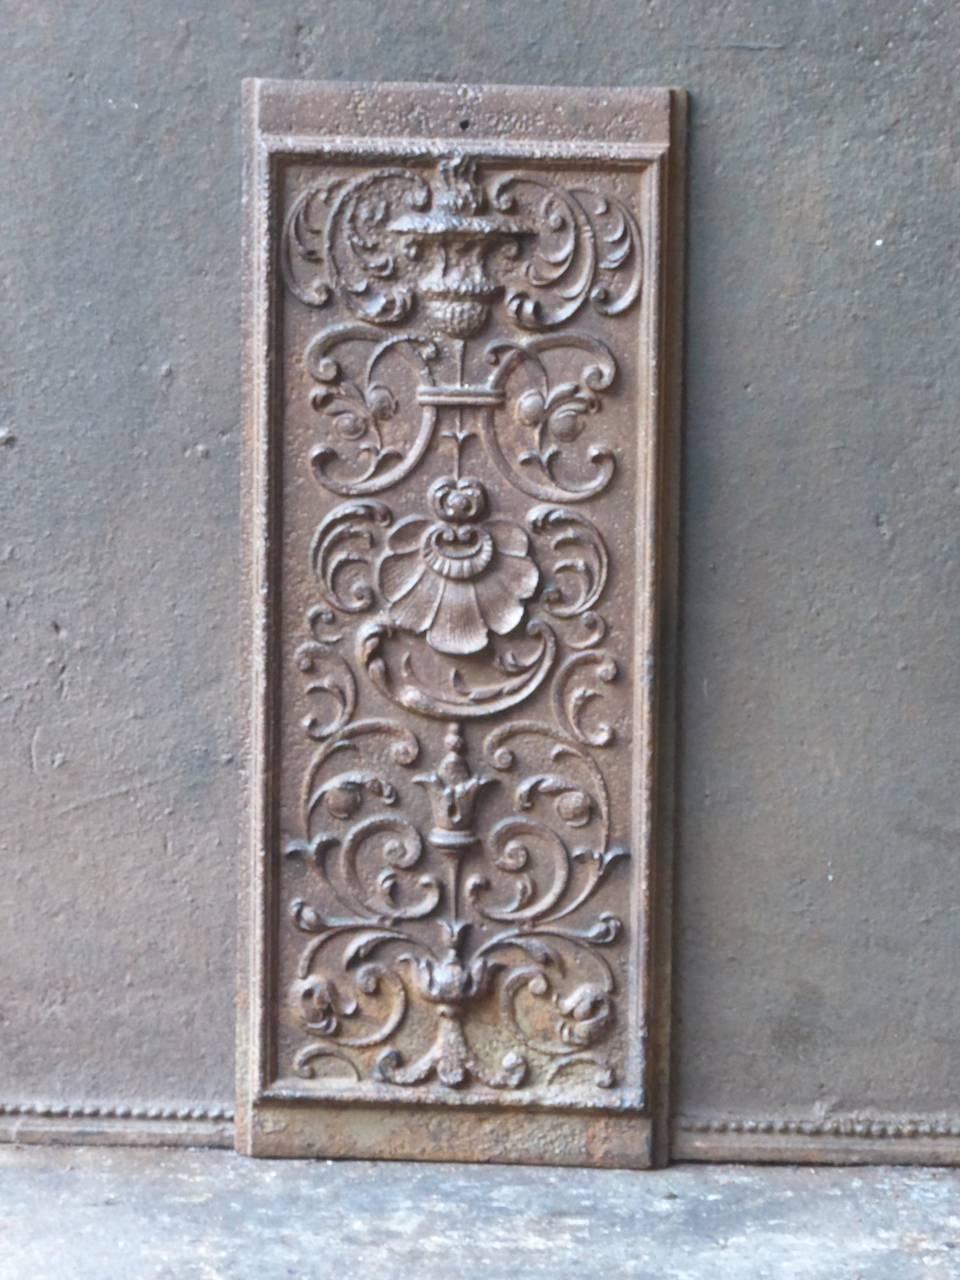 18th century French fireplace fireback with decorations.

We have a unique and specialized collection of antique and used fireplace accessories consisting of more than 1000 listings at 1stdibs. Amongst others, we always have 300+ firebacks, 250+